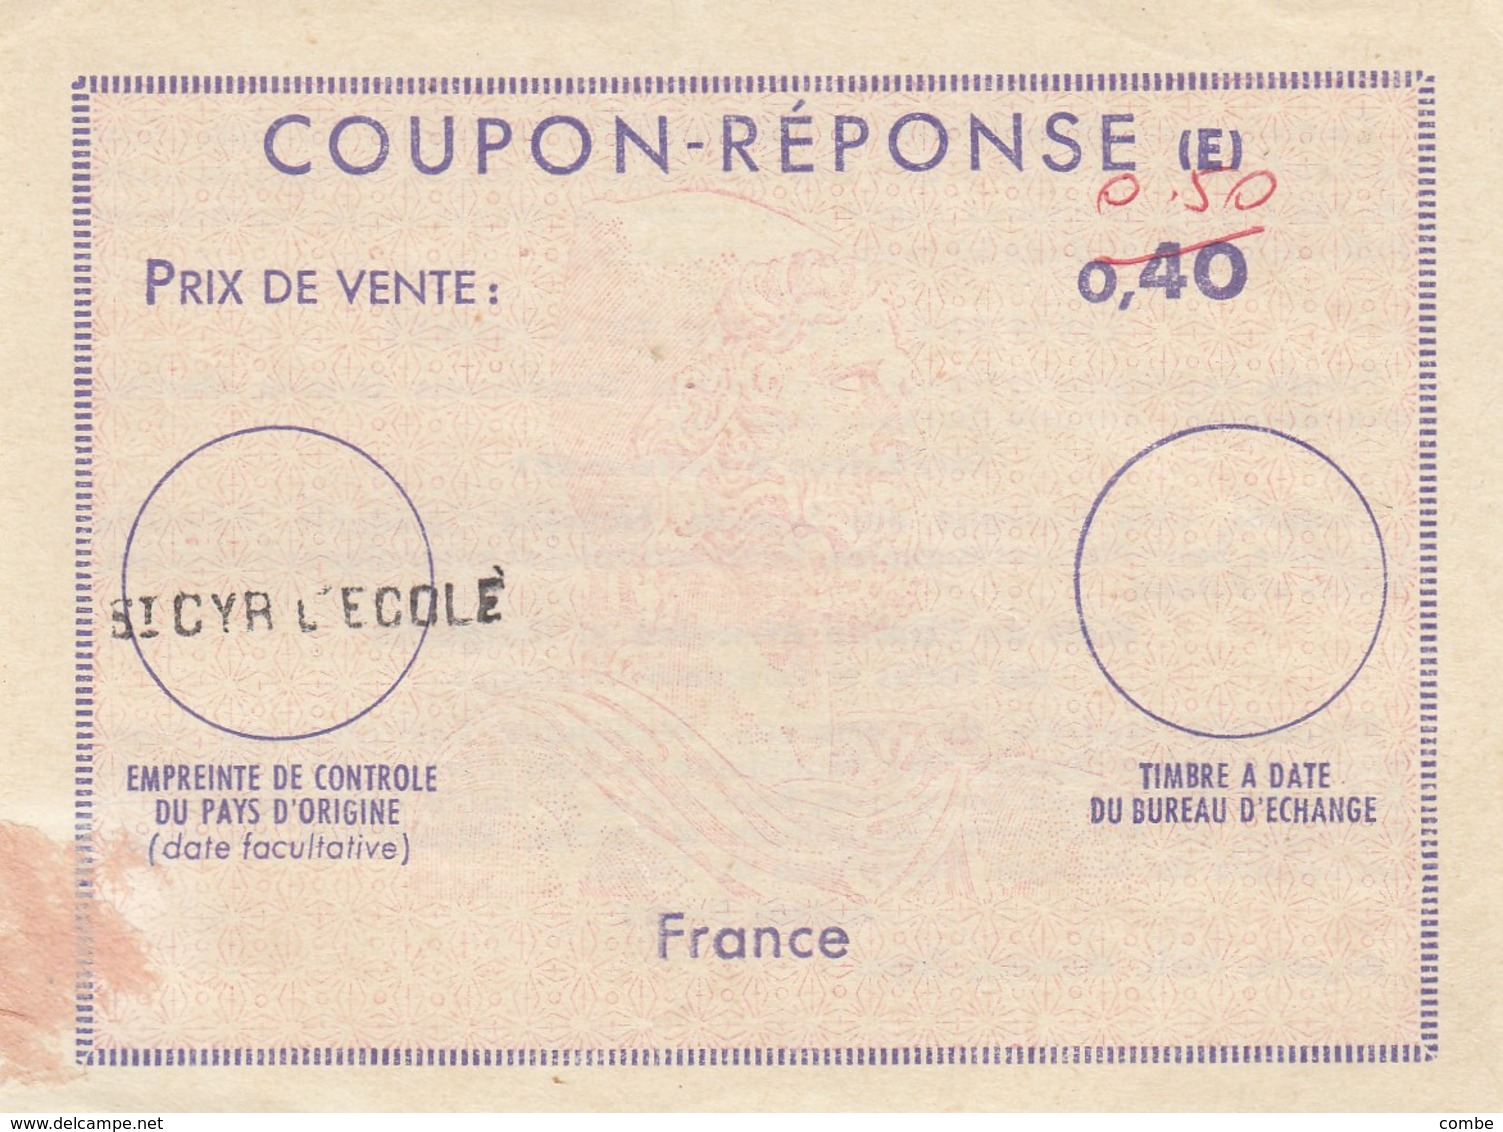 COUPON-REPONSE INTERNATIONAL. E. FRANCE. 0,40 FRANC RECTIFIE 0,50 FRANC . ST CYR-L'ECOLE      / 2 - Antwoordbons